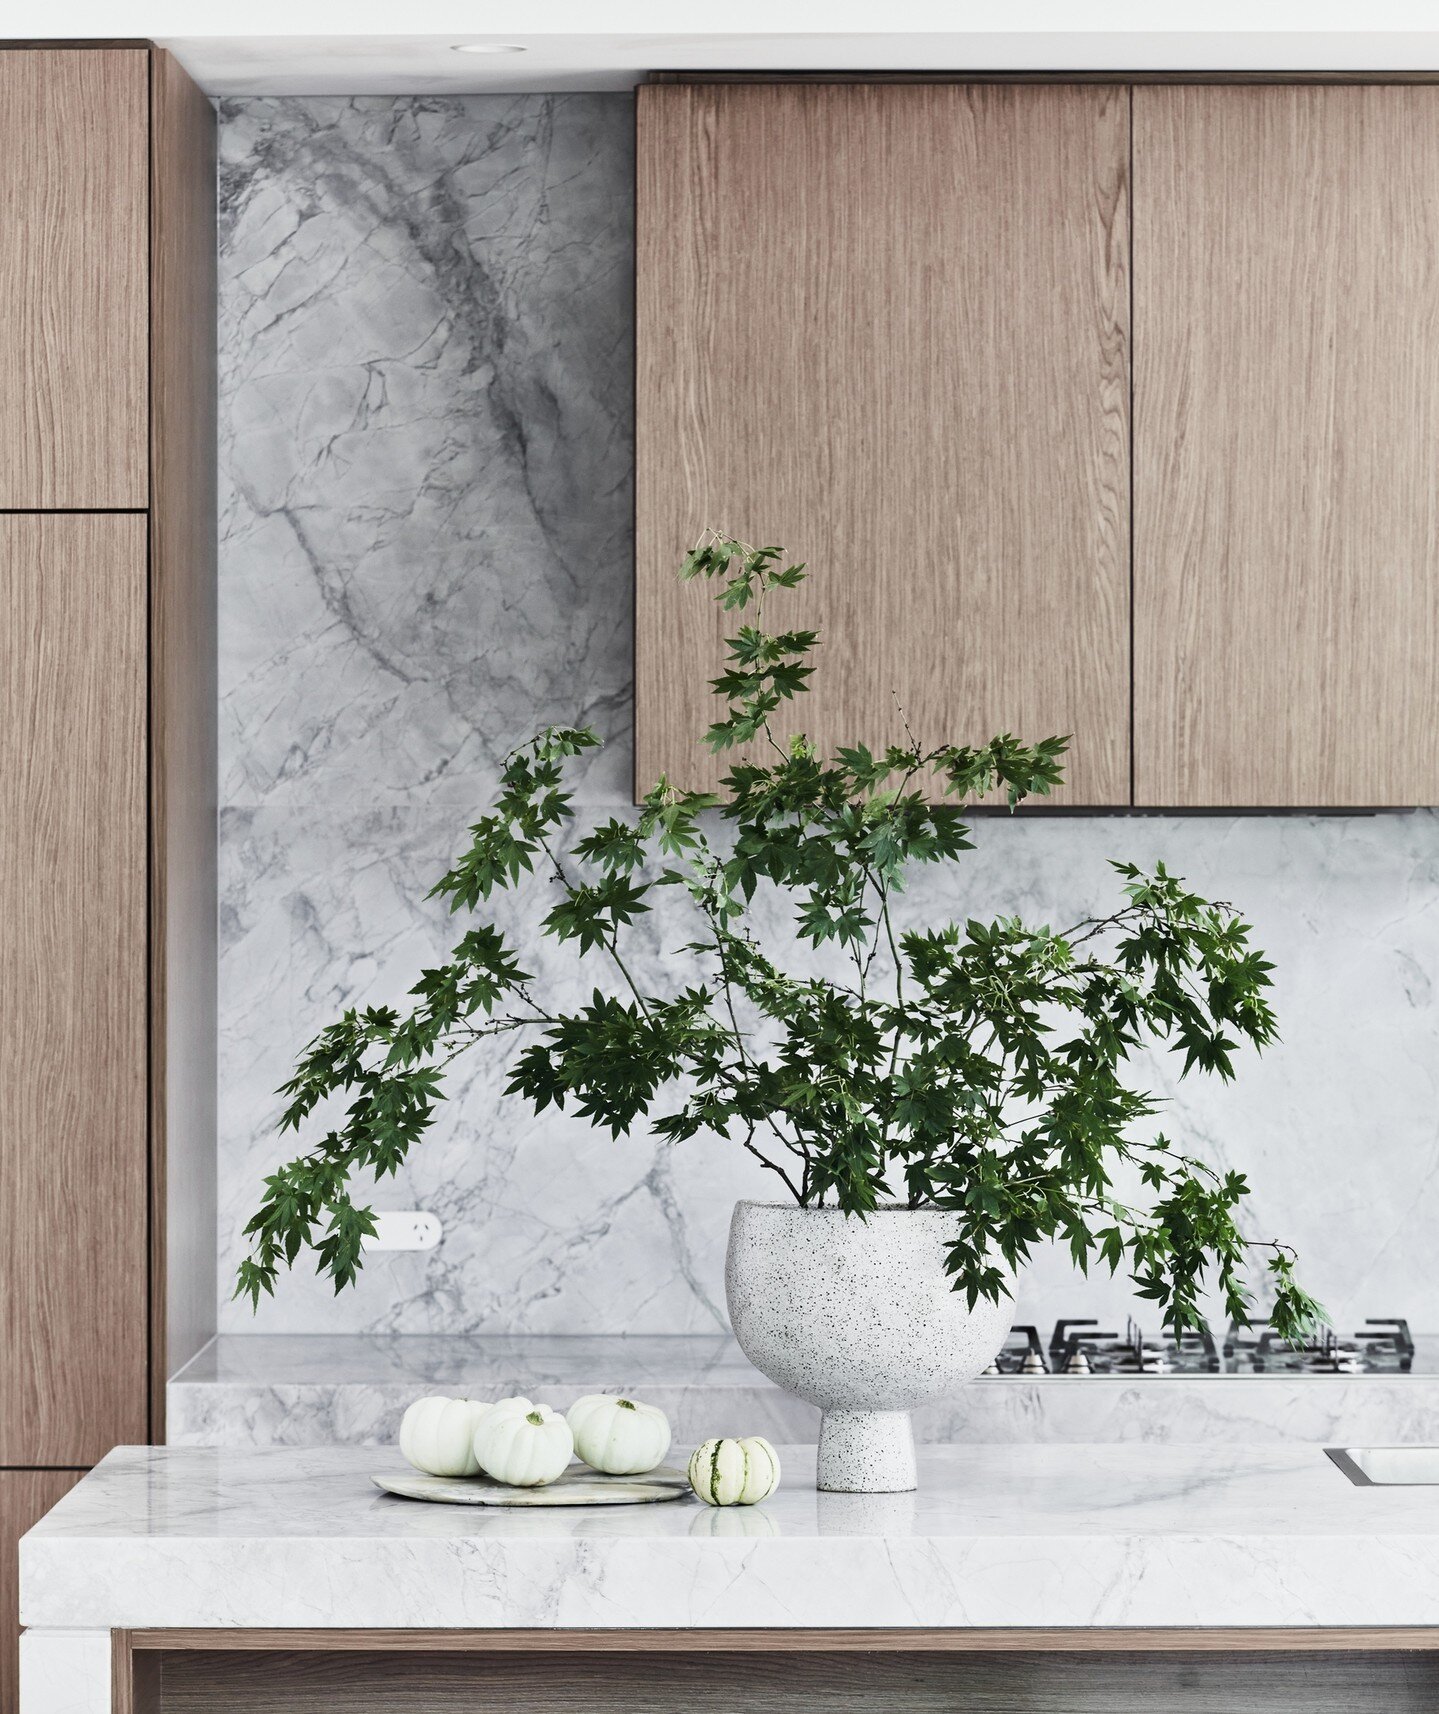 CLOSEUP// A beautiful detail of our Centennial Park kitchen captured by the lovely @maree.homerphotography...⁠
⁠
Styling @kerrieann_jones_stylist⁠
Architecture @zoephillipsresidential ⁠
.⁠
.⁠
.⁠
.⁠
.⁠
#residentialdesign#interiordesign #sydneydesigner